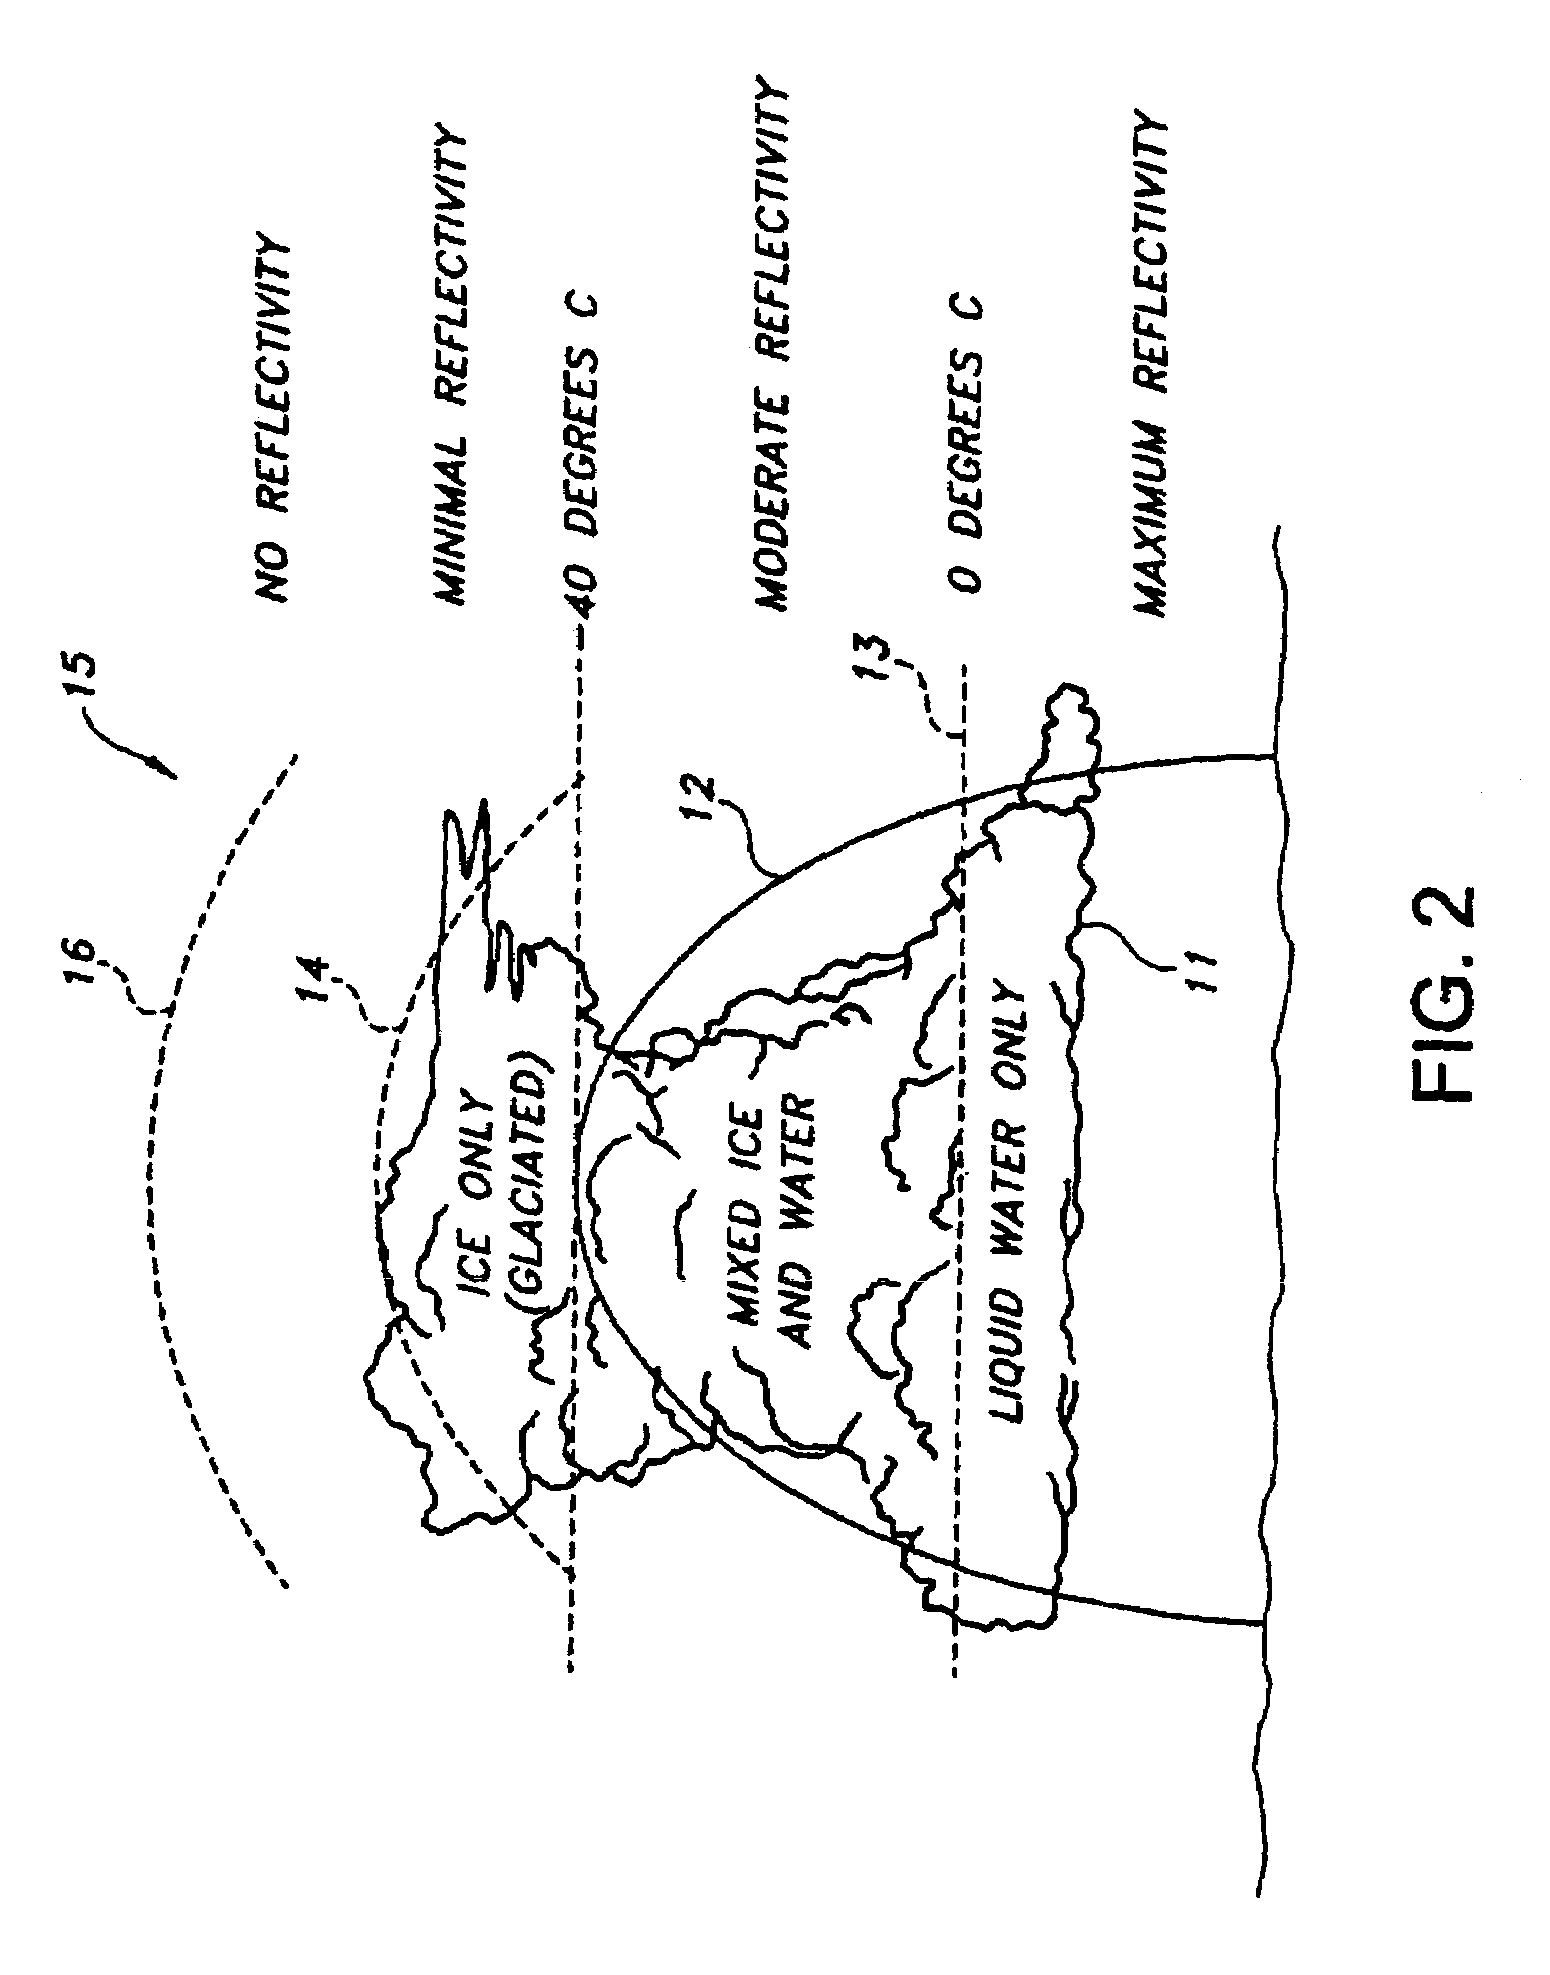 Variable loop gain and resolution pulse system and method with point target editing capability